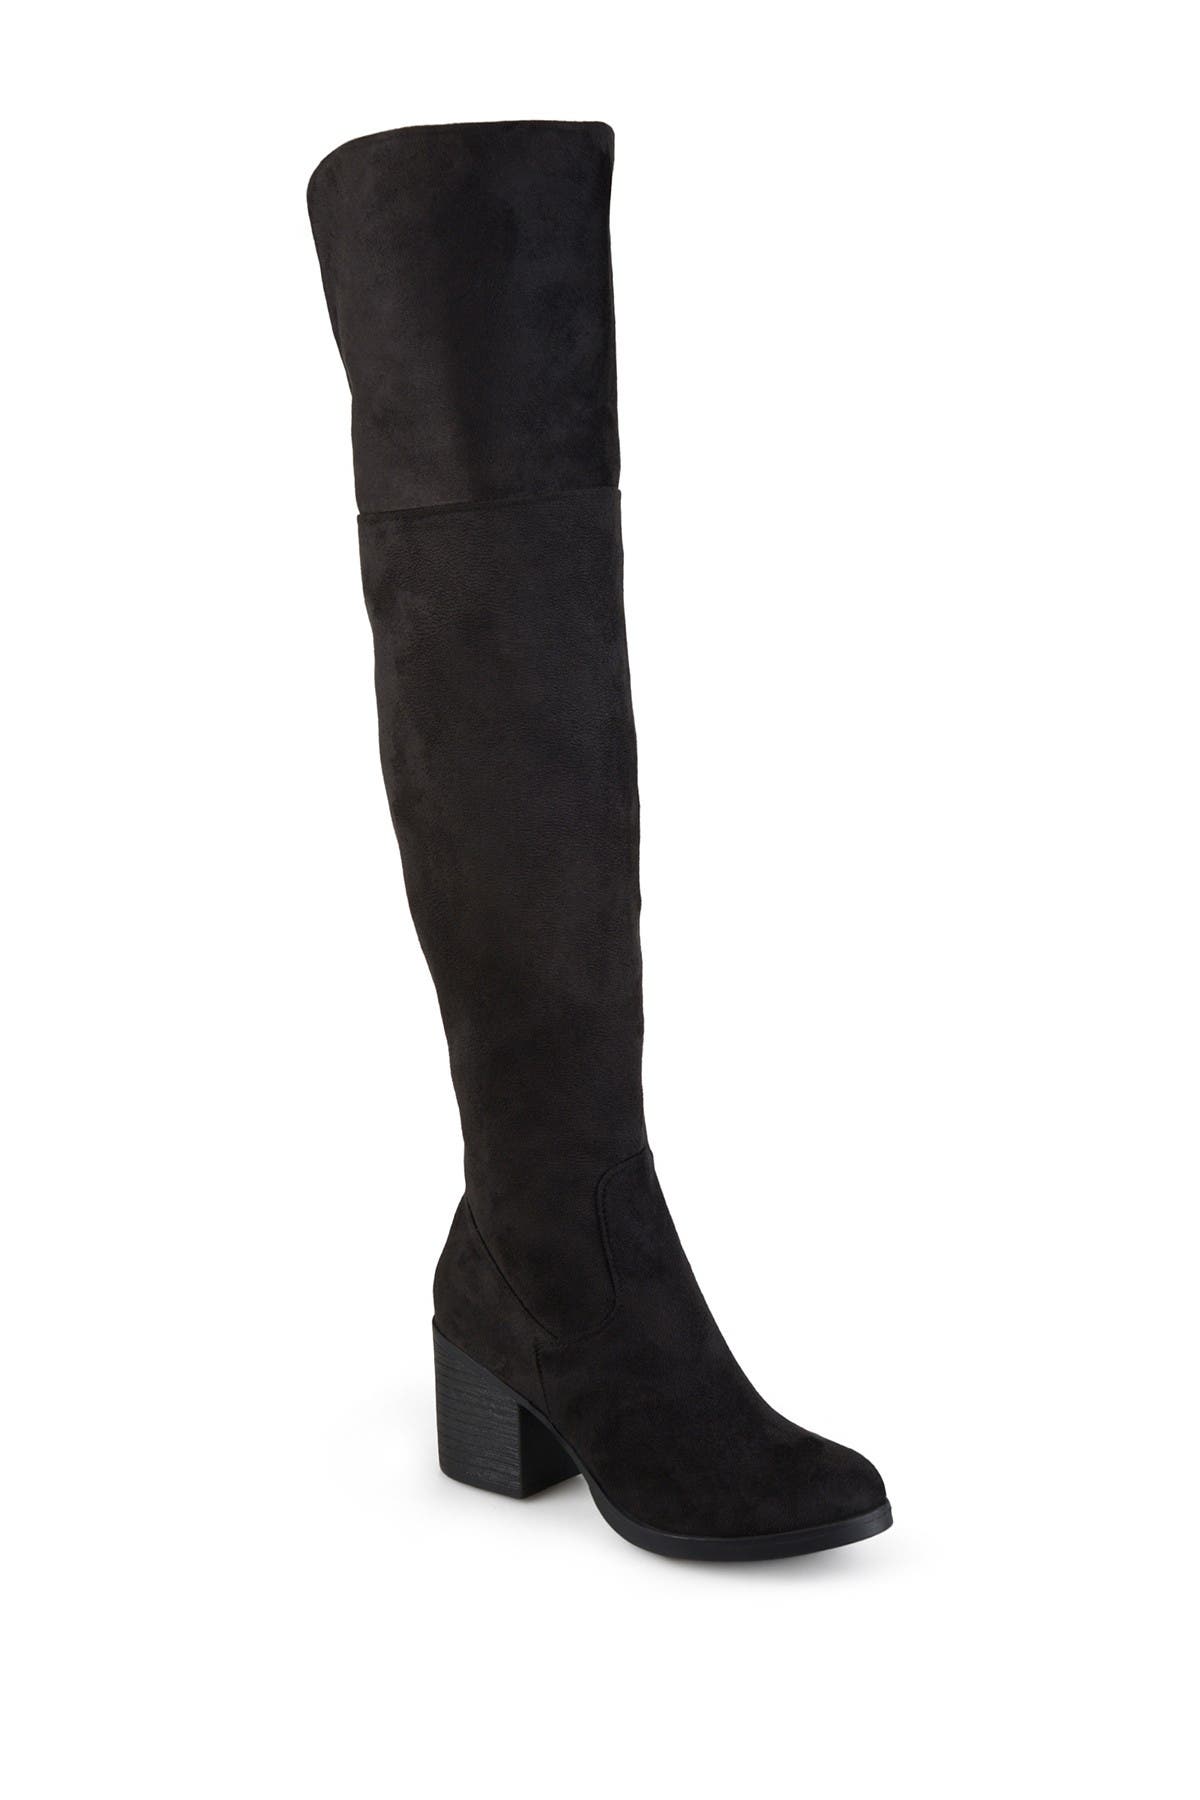 journee collection sana thigh high boot